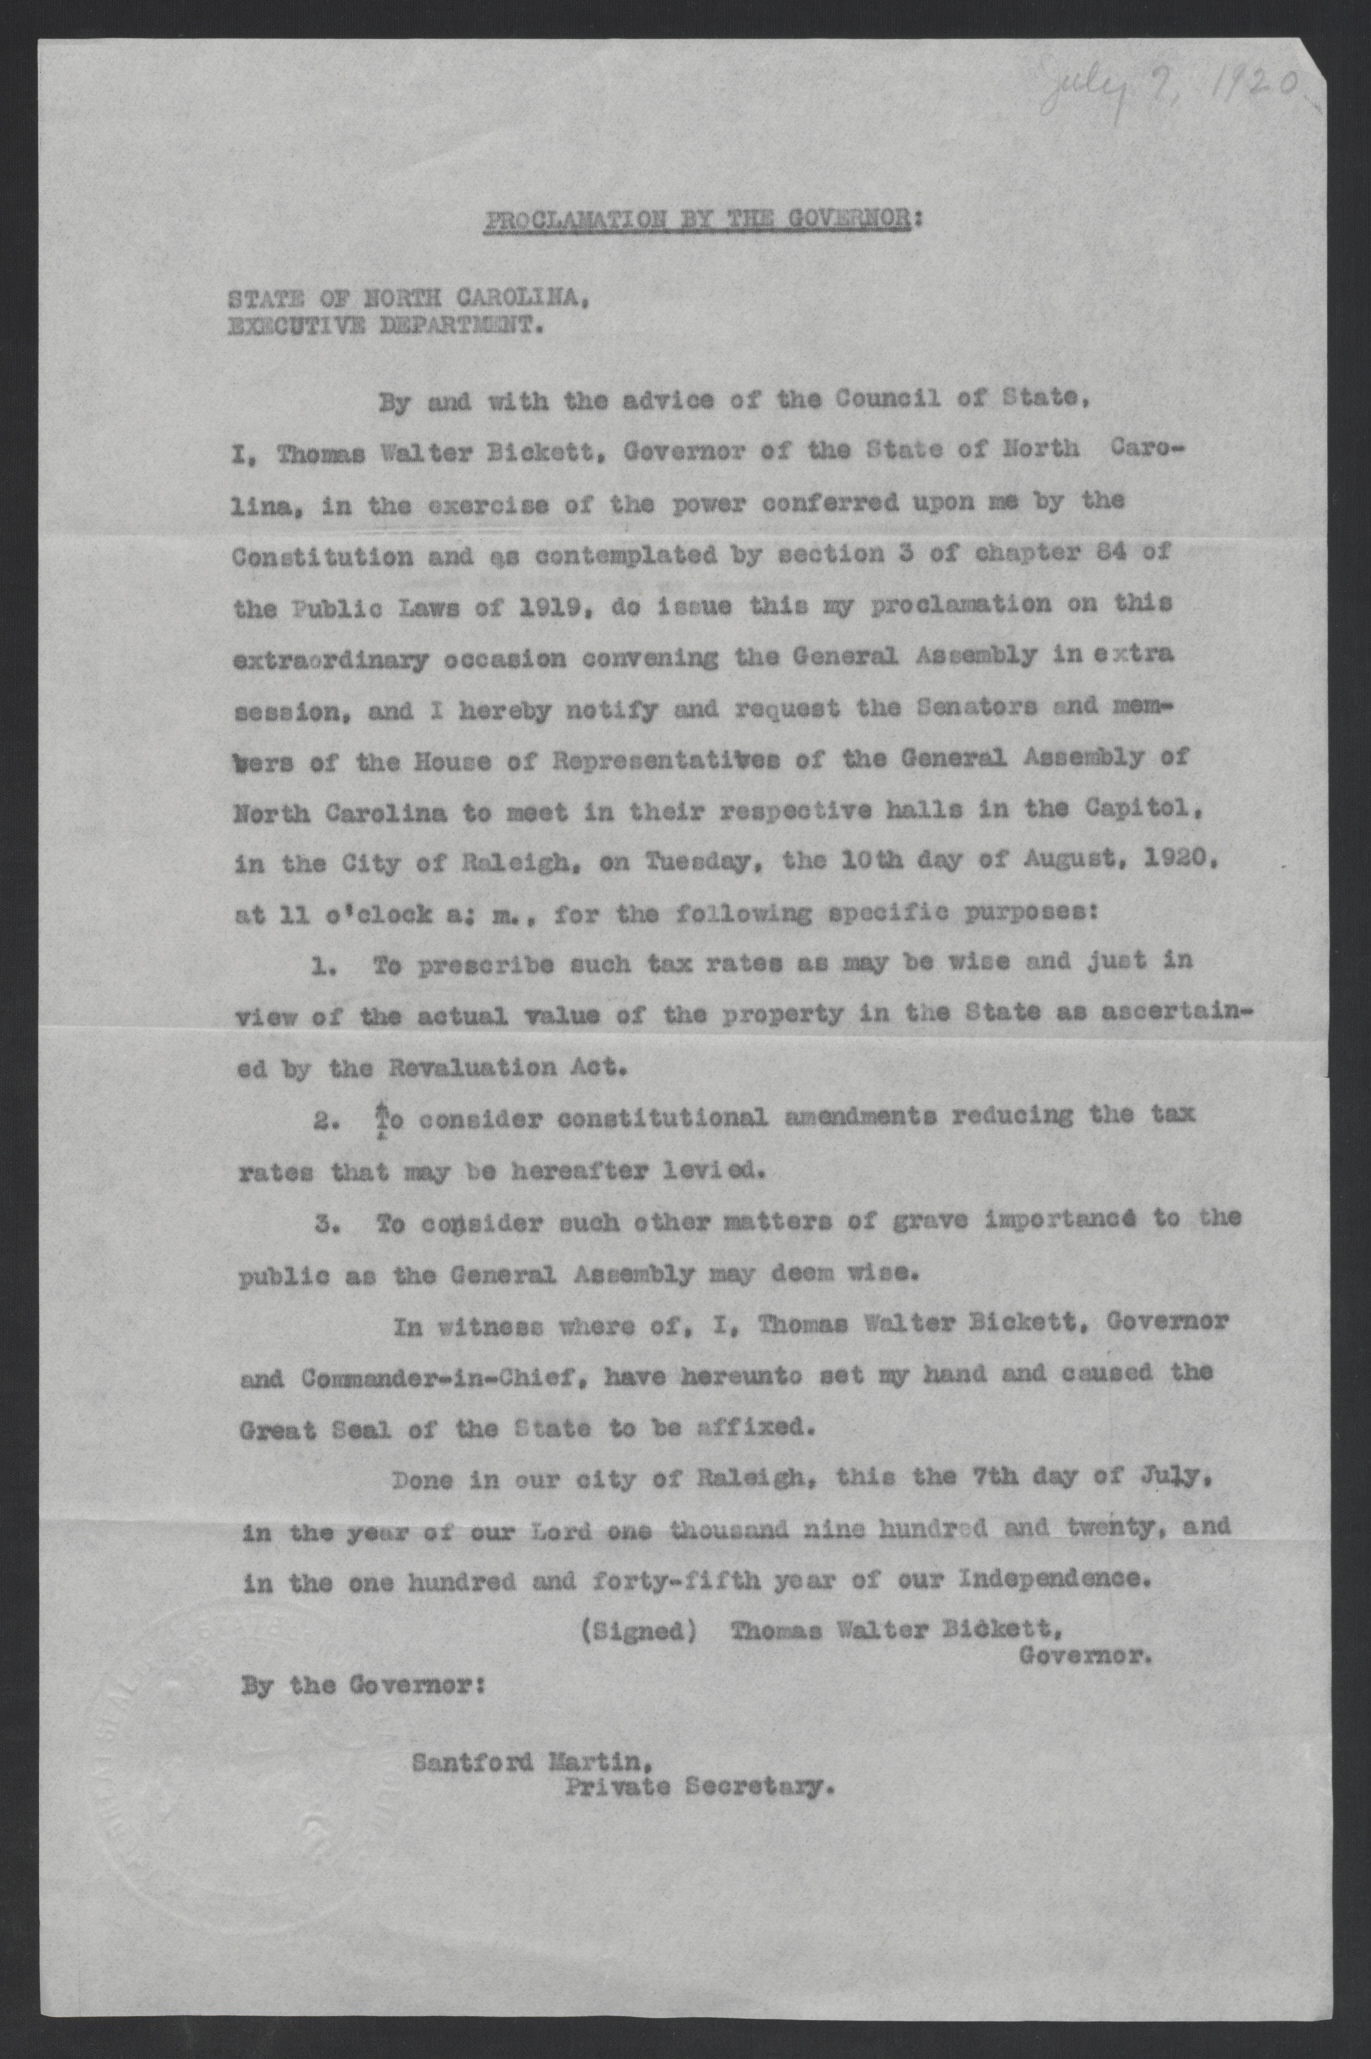 Proclamation by Governor Thomas W. Bickett Convening the General Assembly in Extra Session, July 2, 1920